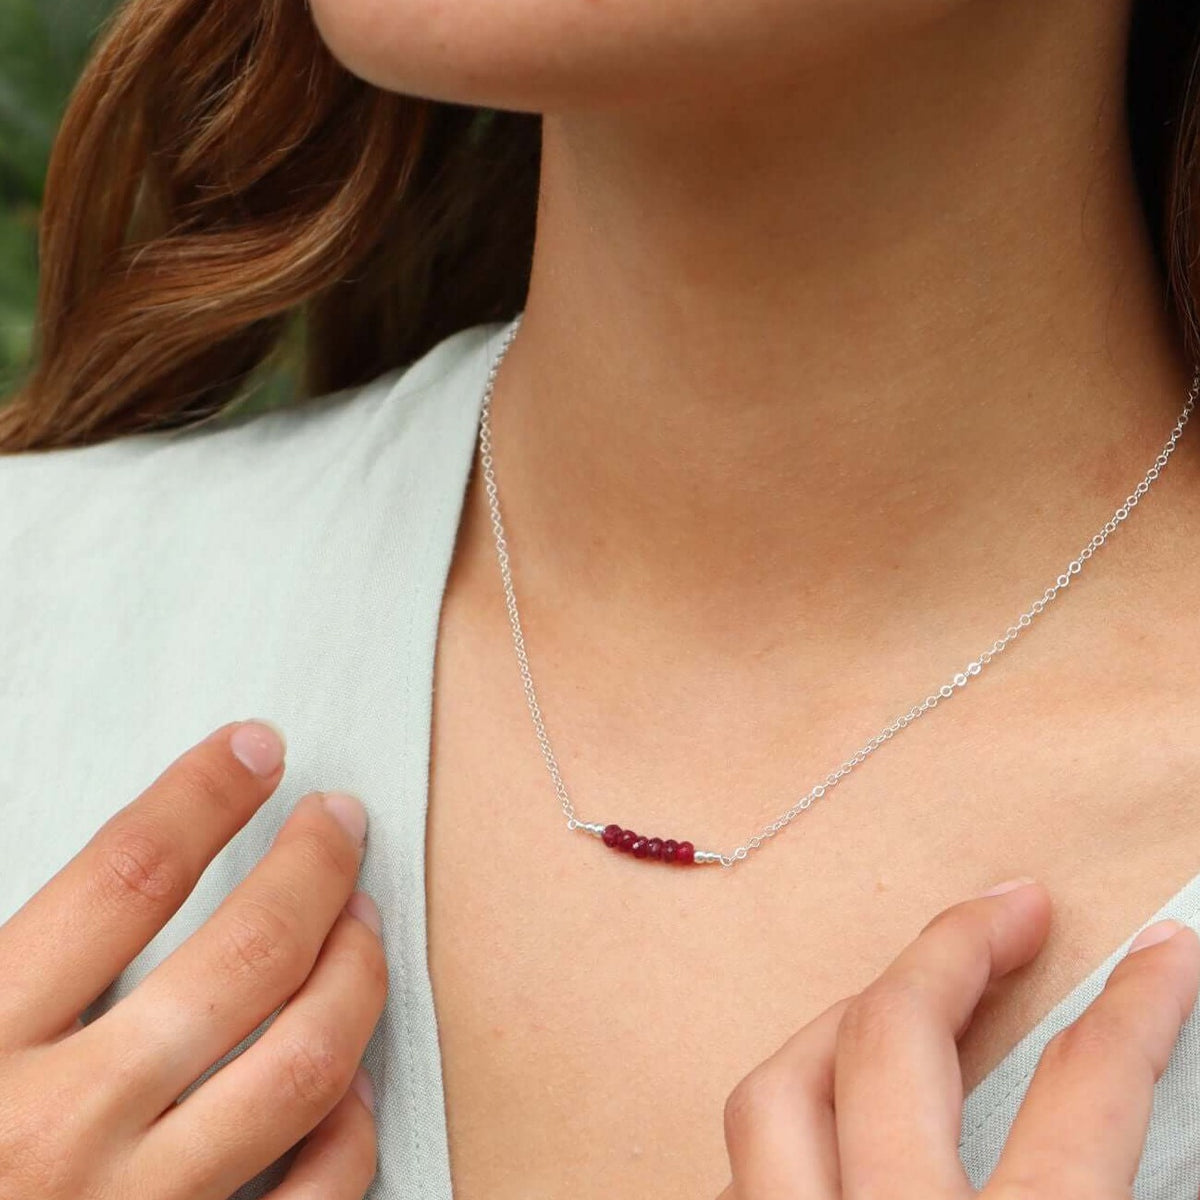 Faceted Bead Bar Necklace - Ruby - Sterling Silver - Luna Tide Handmade Jewellery